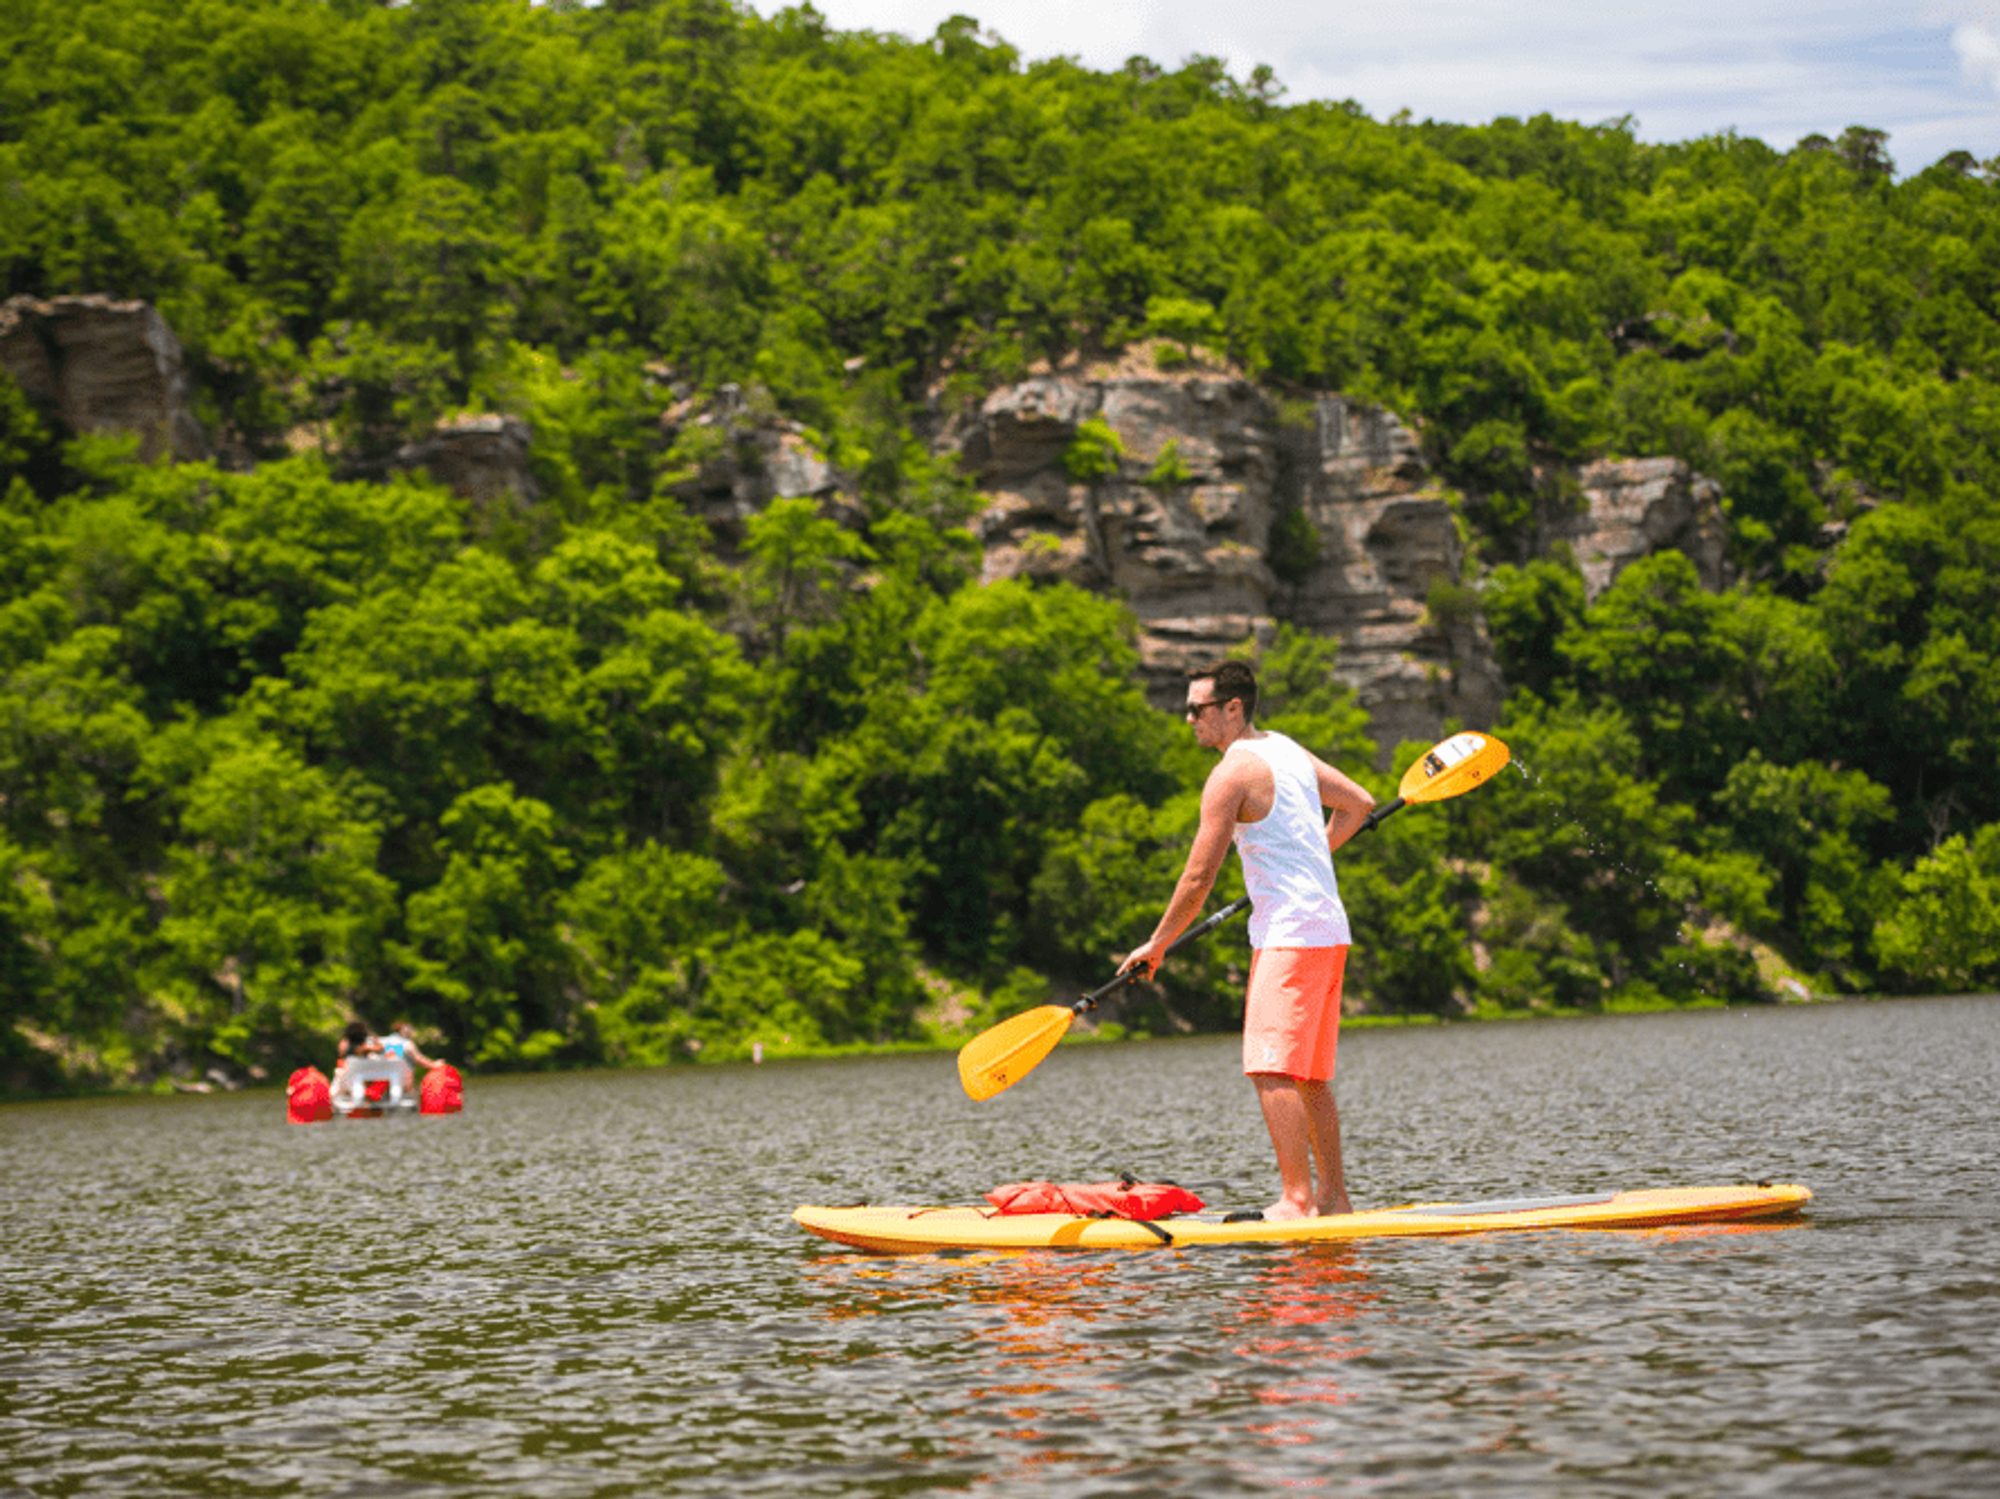 Those who love water are in luck at Broken Bow Lake in Beavers Bend State Park.